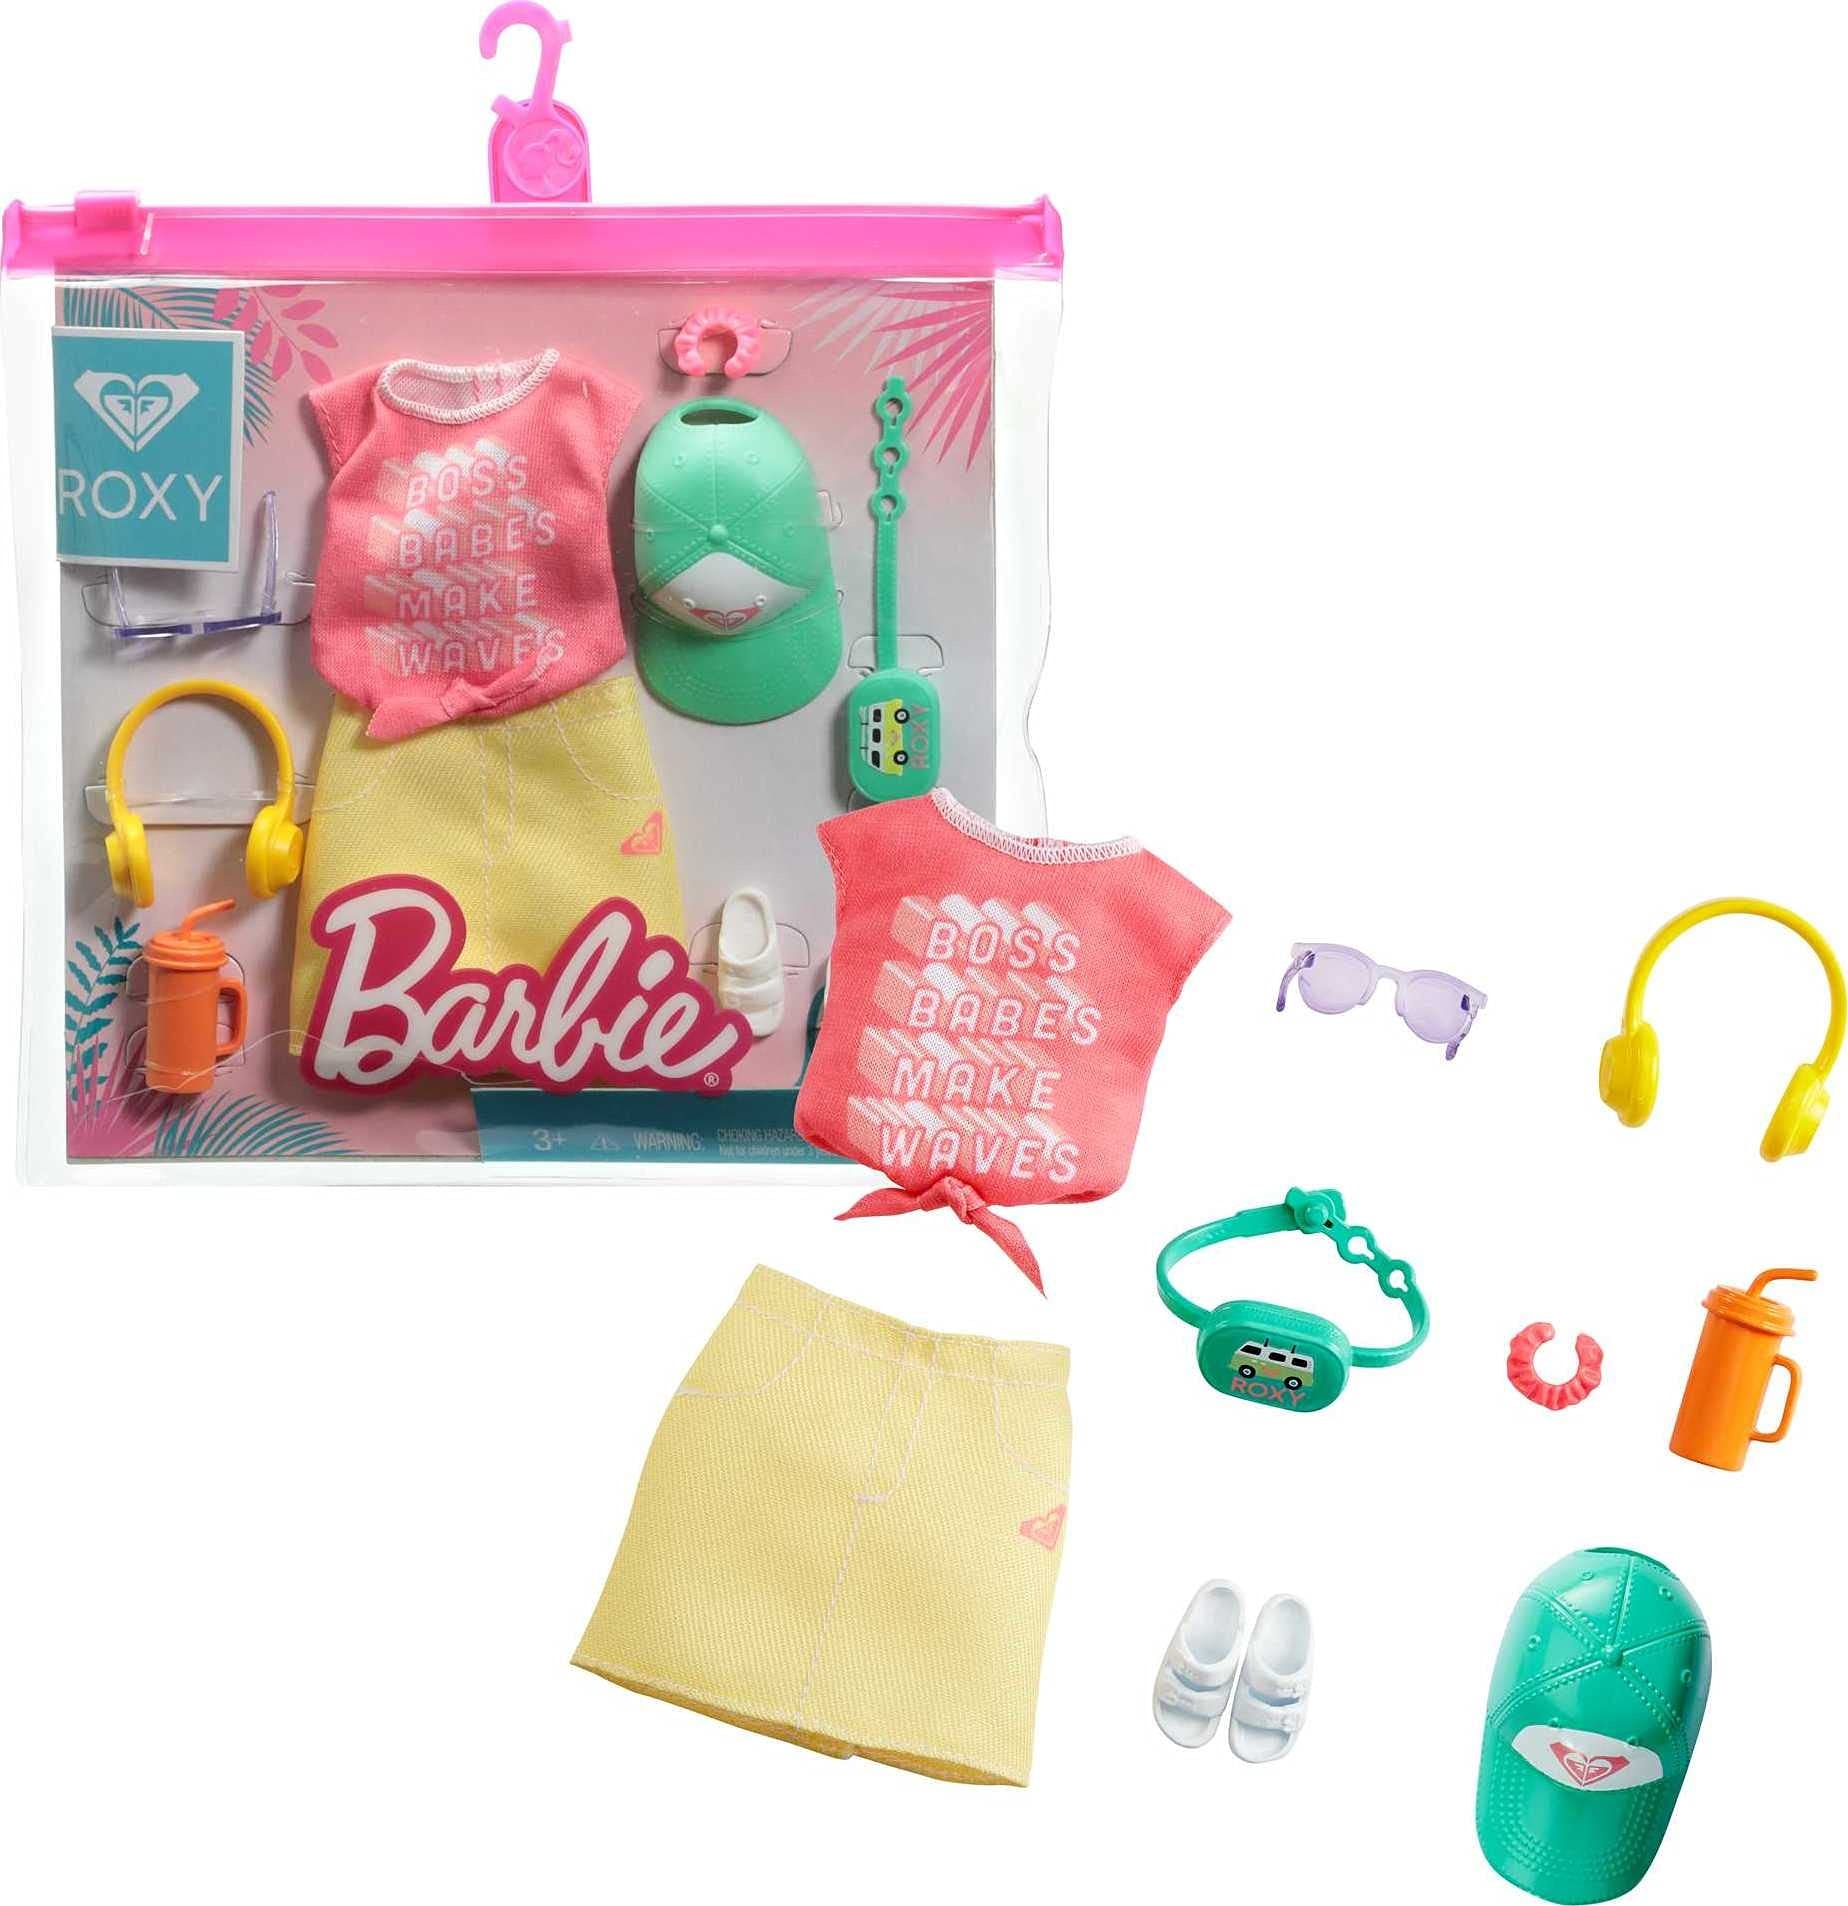 Mattel - Barbie Storytelling Fashion Inspired by Roxy Pack, Pink Graffit Tee & Yellow Mini Skirt, Hat, Sunglasses, Sandals, and Accessories